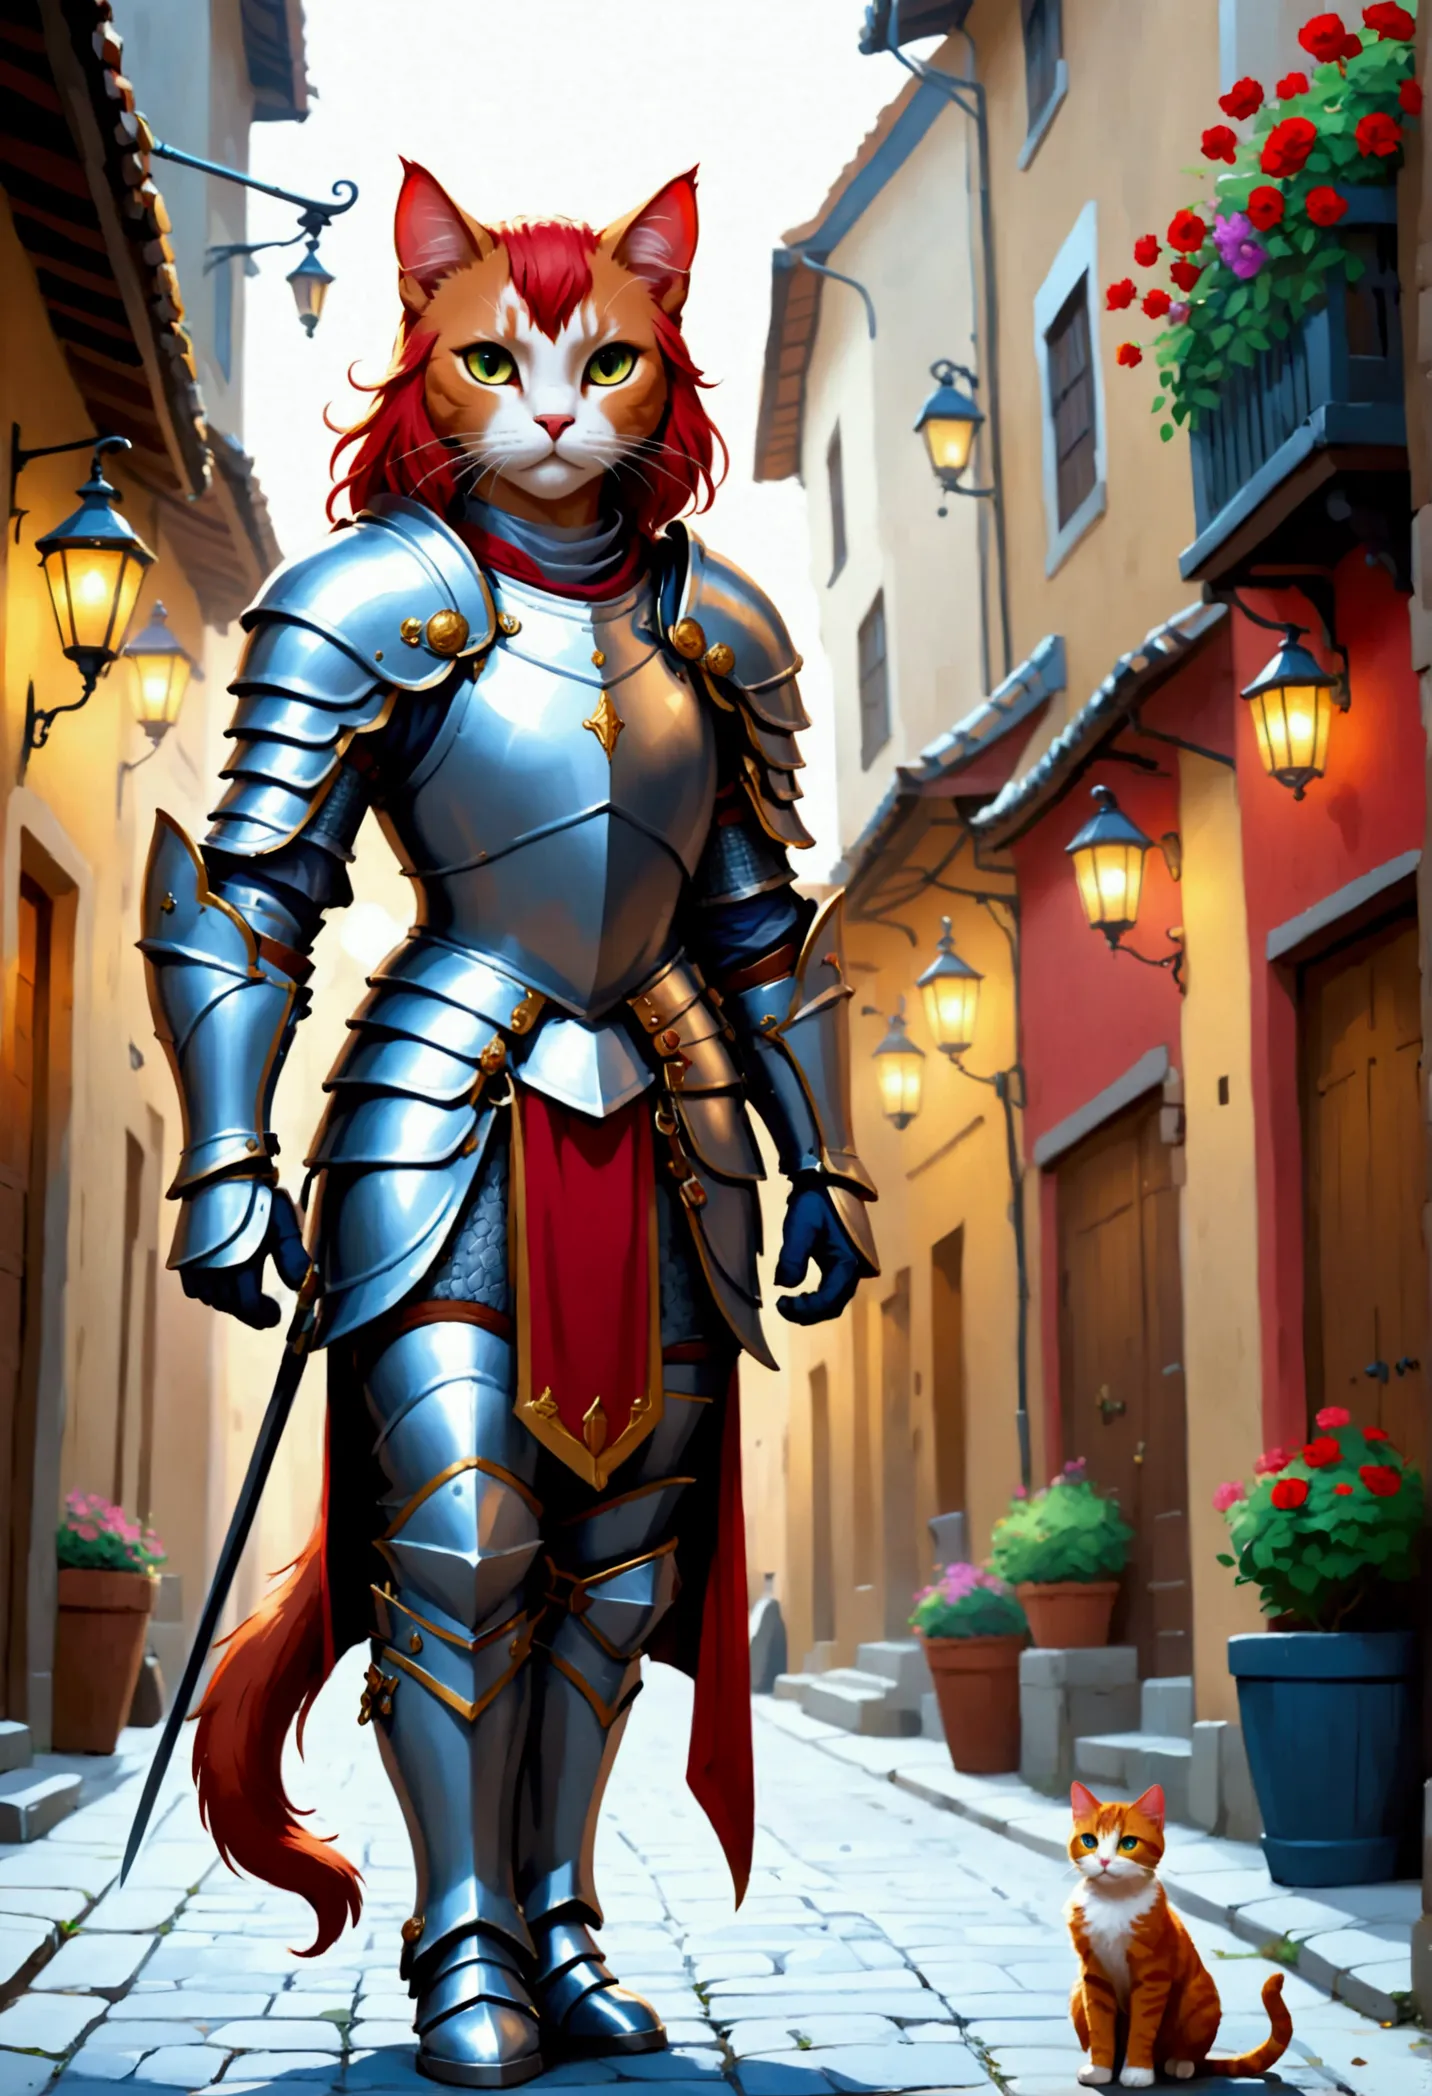 arafed a  ((huge sized cat: 1.3))  near a human knight walking in  fantasy street, a ((cat big as a horse)), the cat is wearing ...